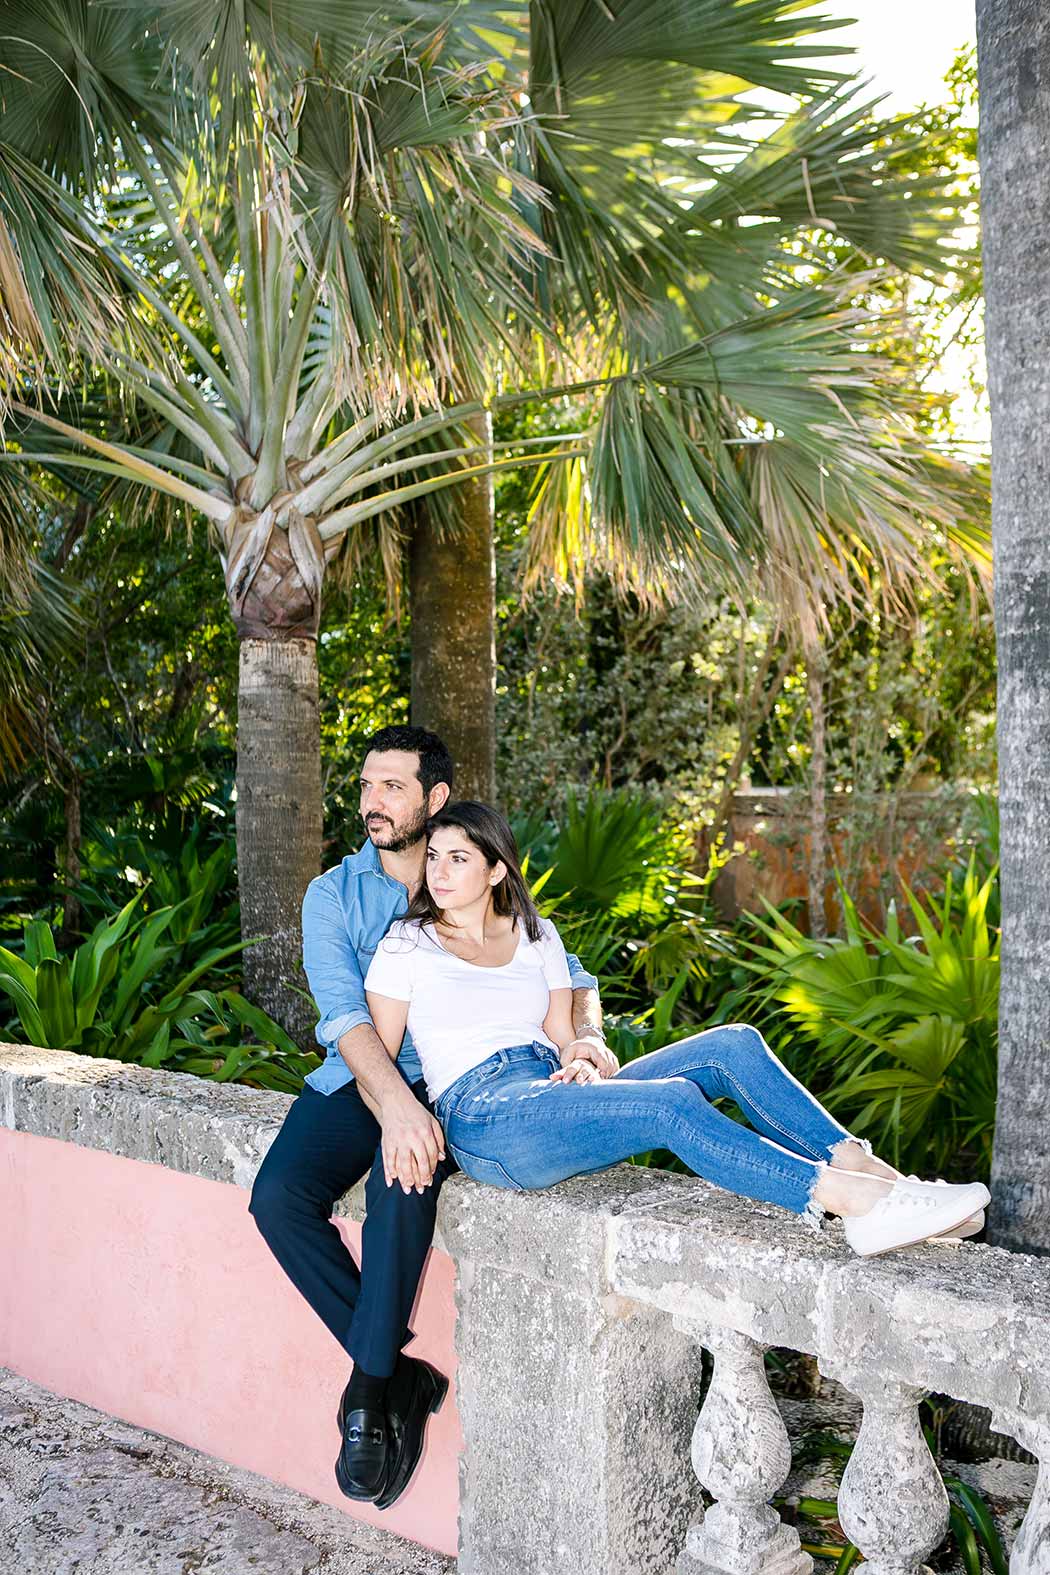 casual photoshoot at vizcaya museum miami | engagement photoshoot in jeans and tee shirt